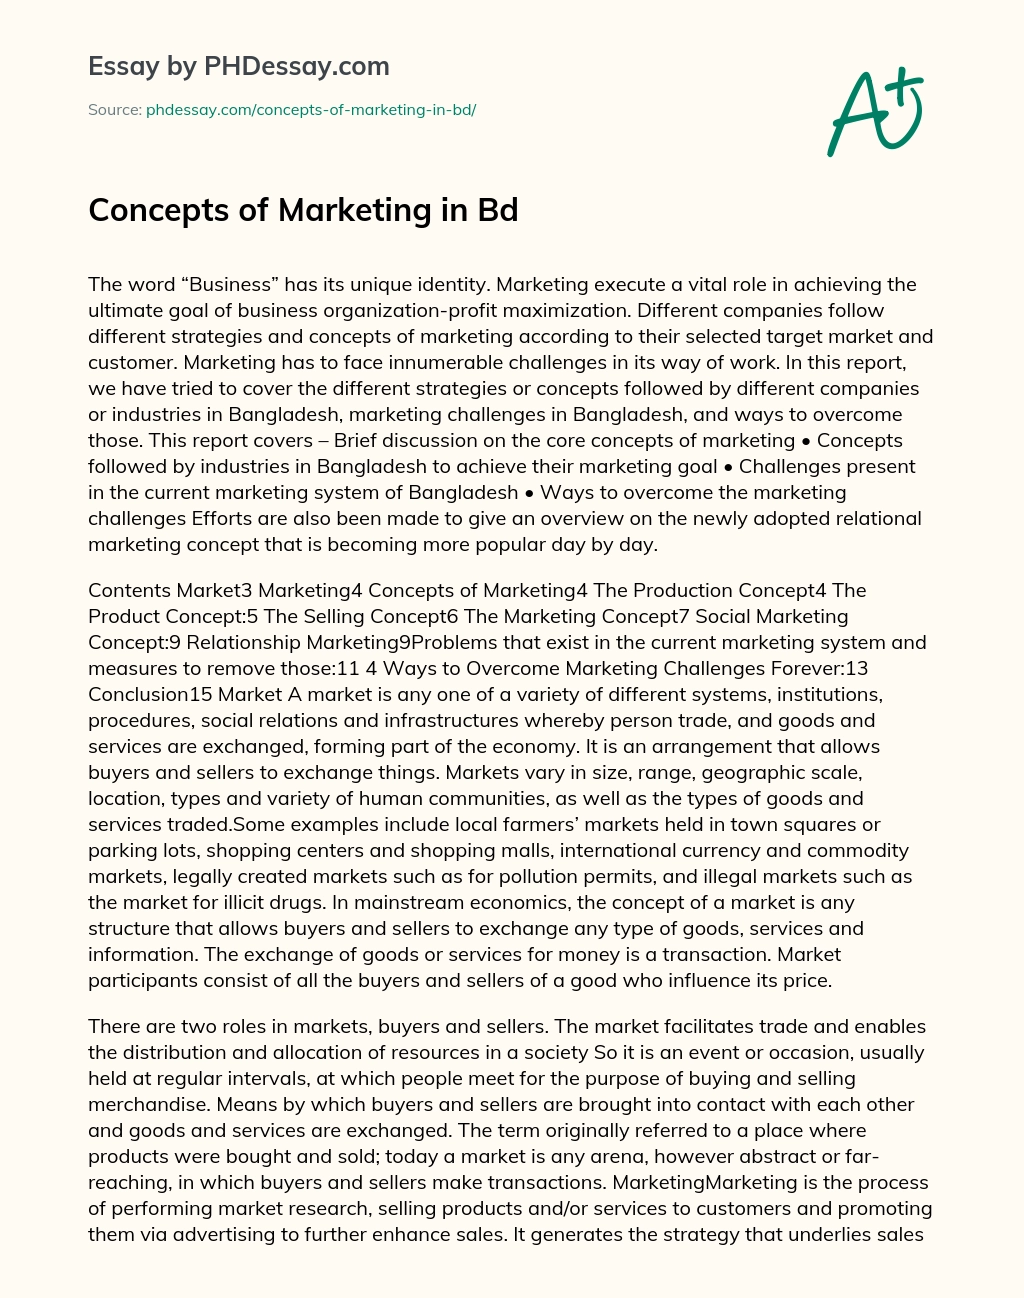 Concepts of Marketing in Bd essay